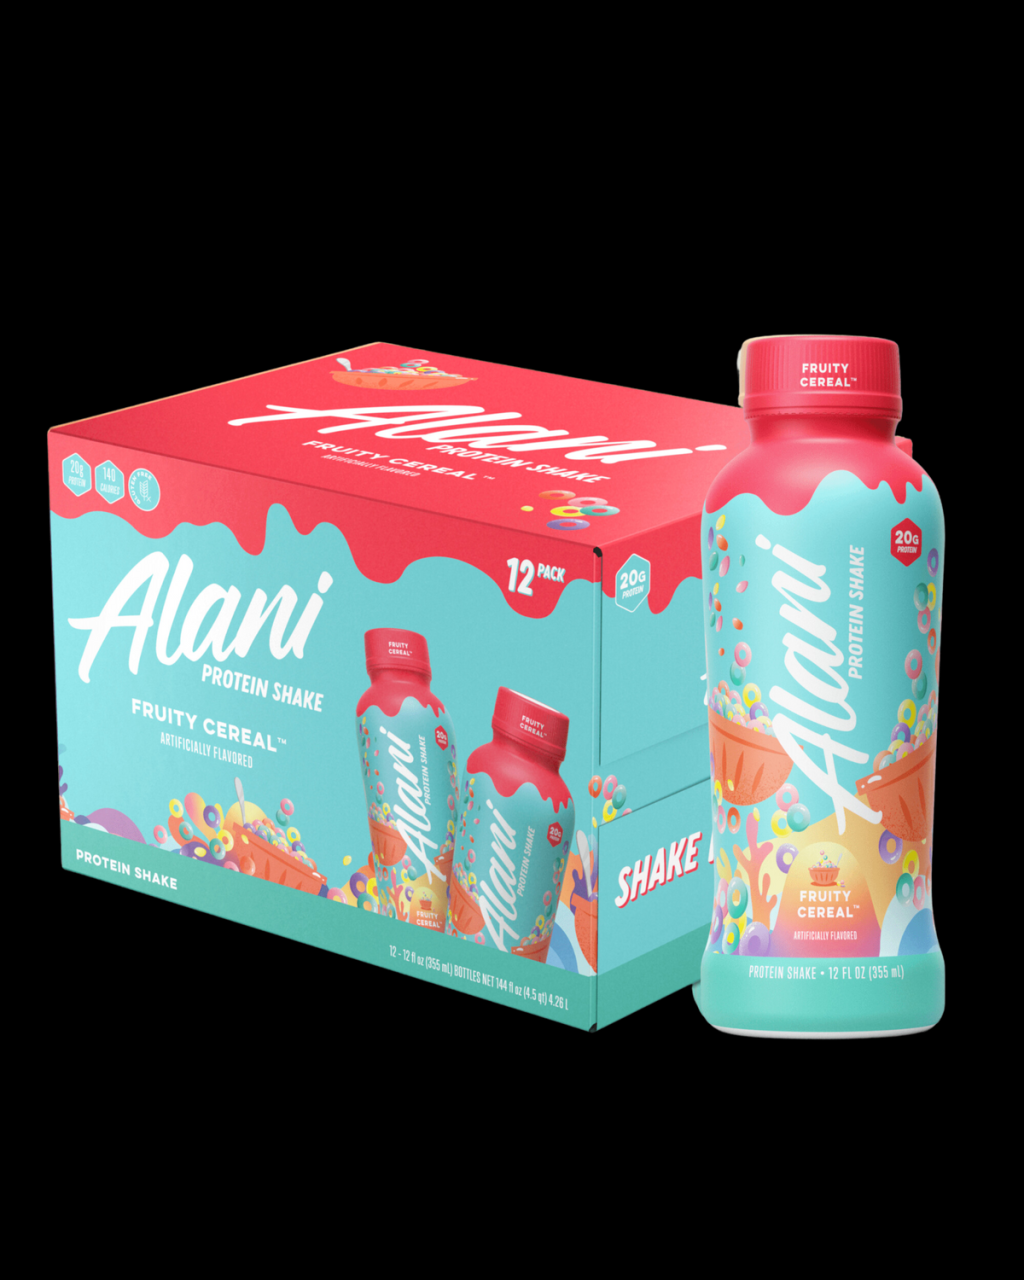 Picture of: Alani Nu Fruity Cereal Protein Shake -Pack